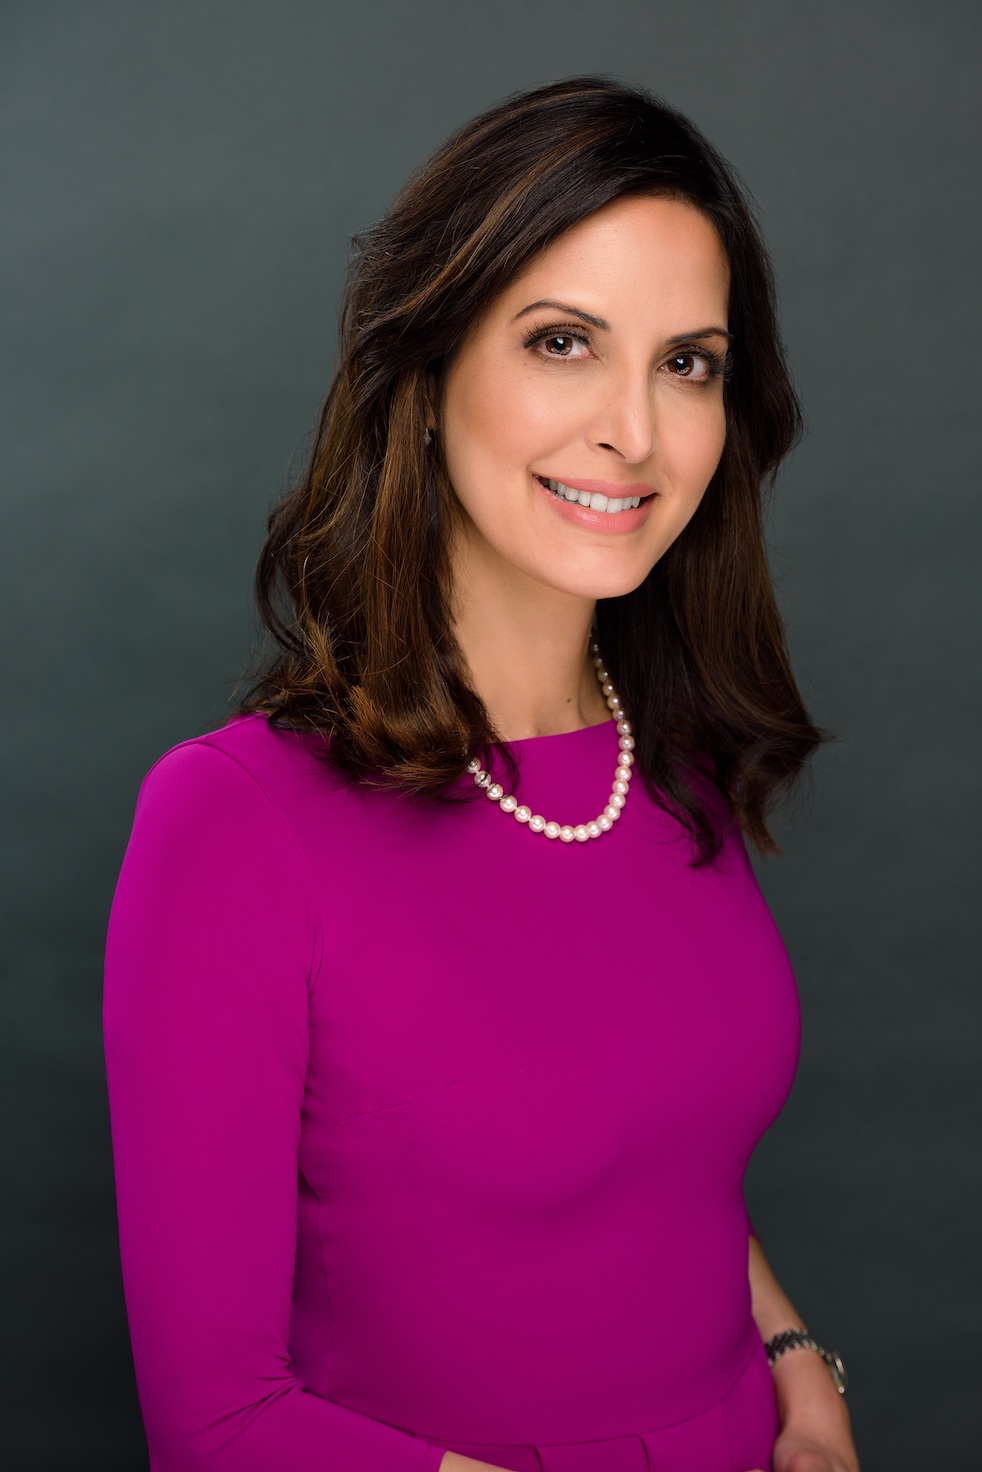 Dr. Anita Gill in Bright Pink Dress - Dermatologist in The Woodlands, TX